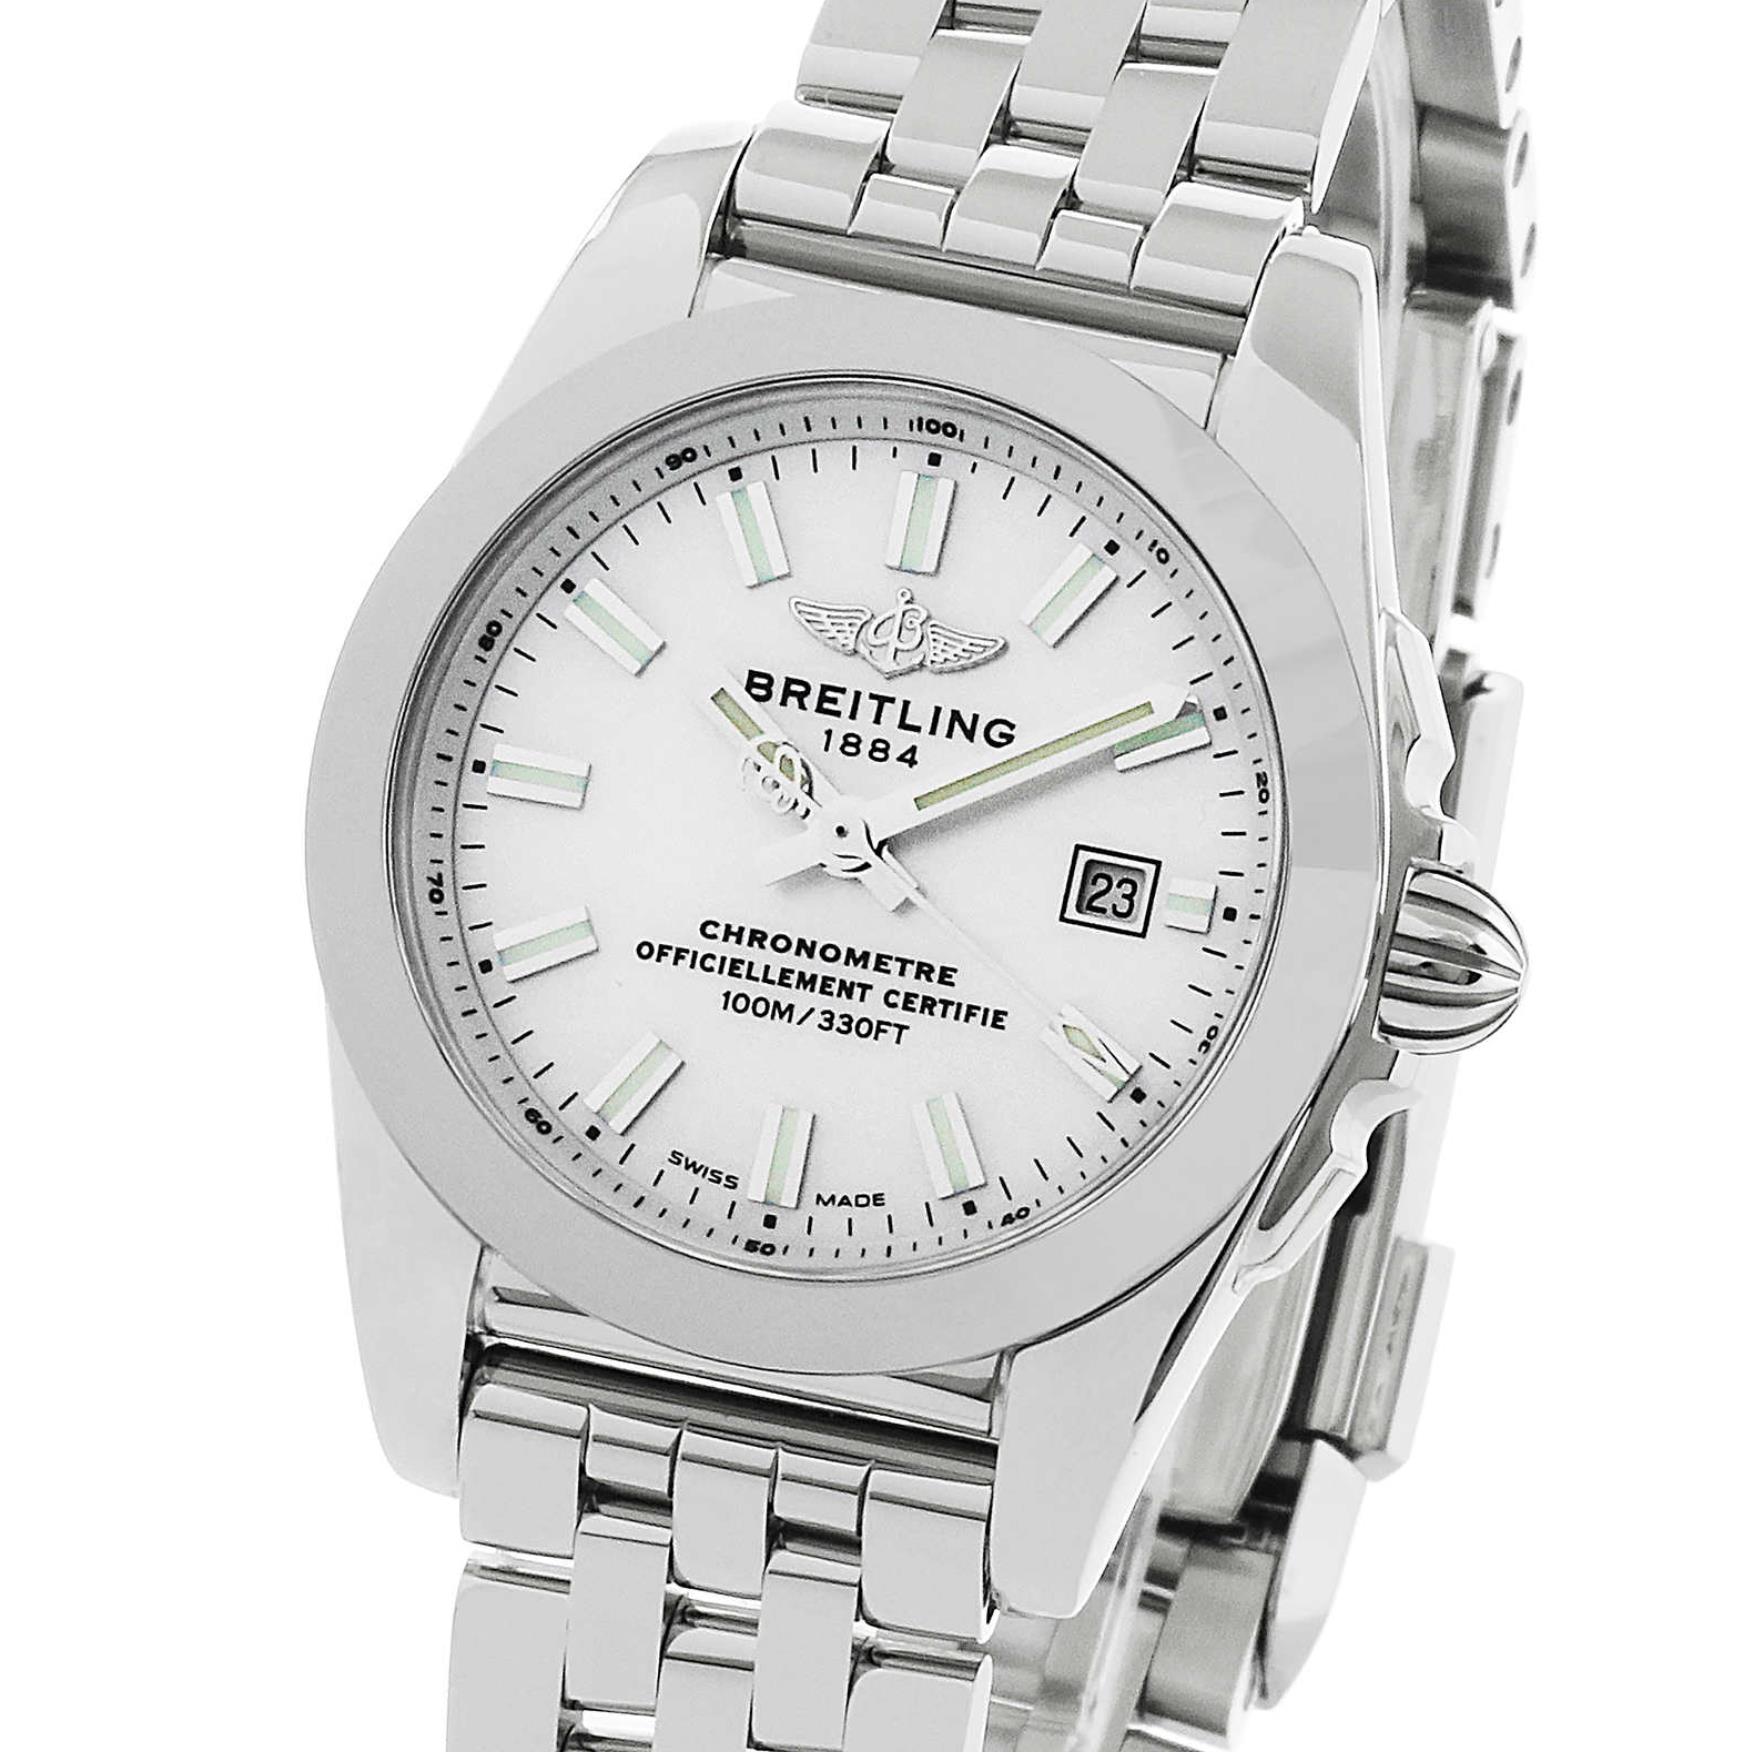 The white dial fake watch has date window.